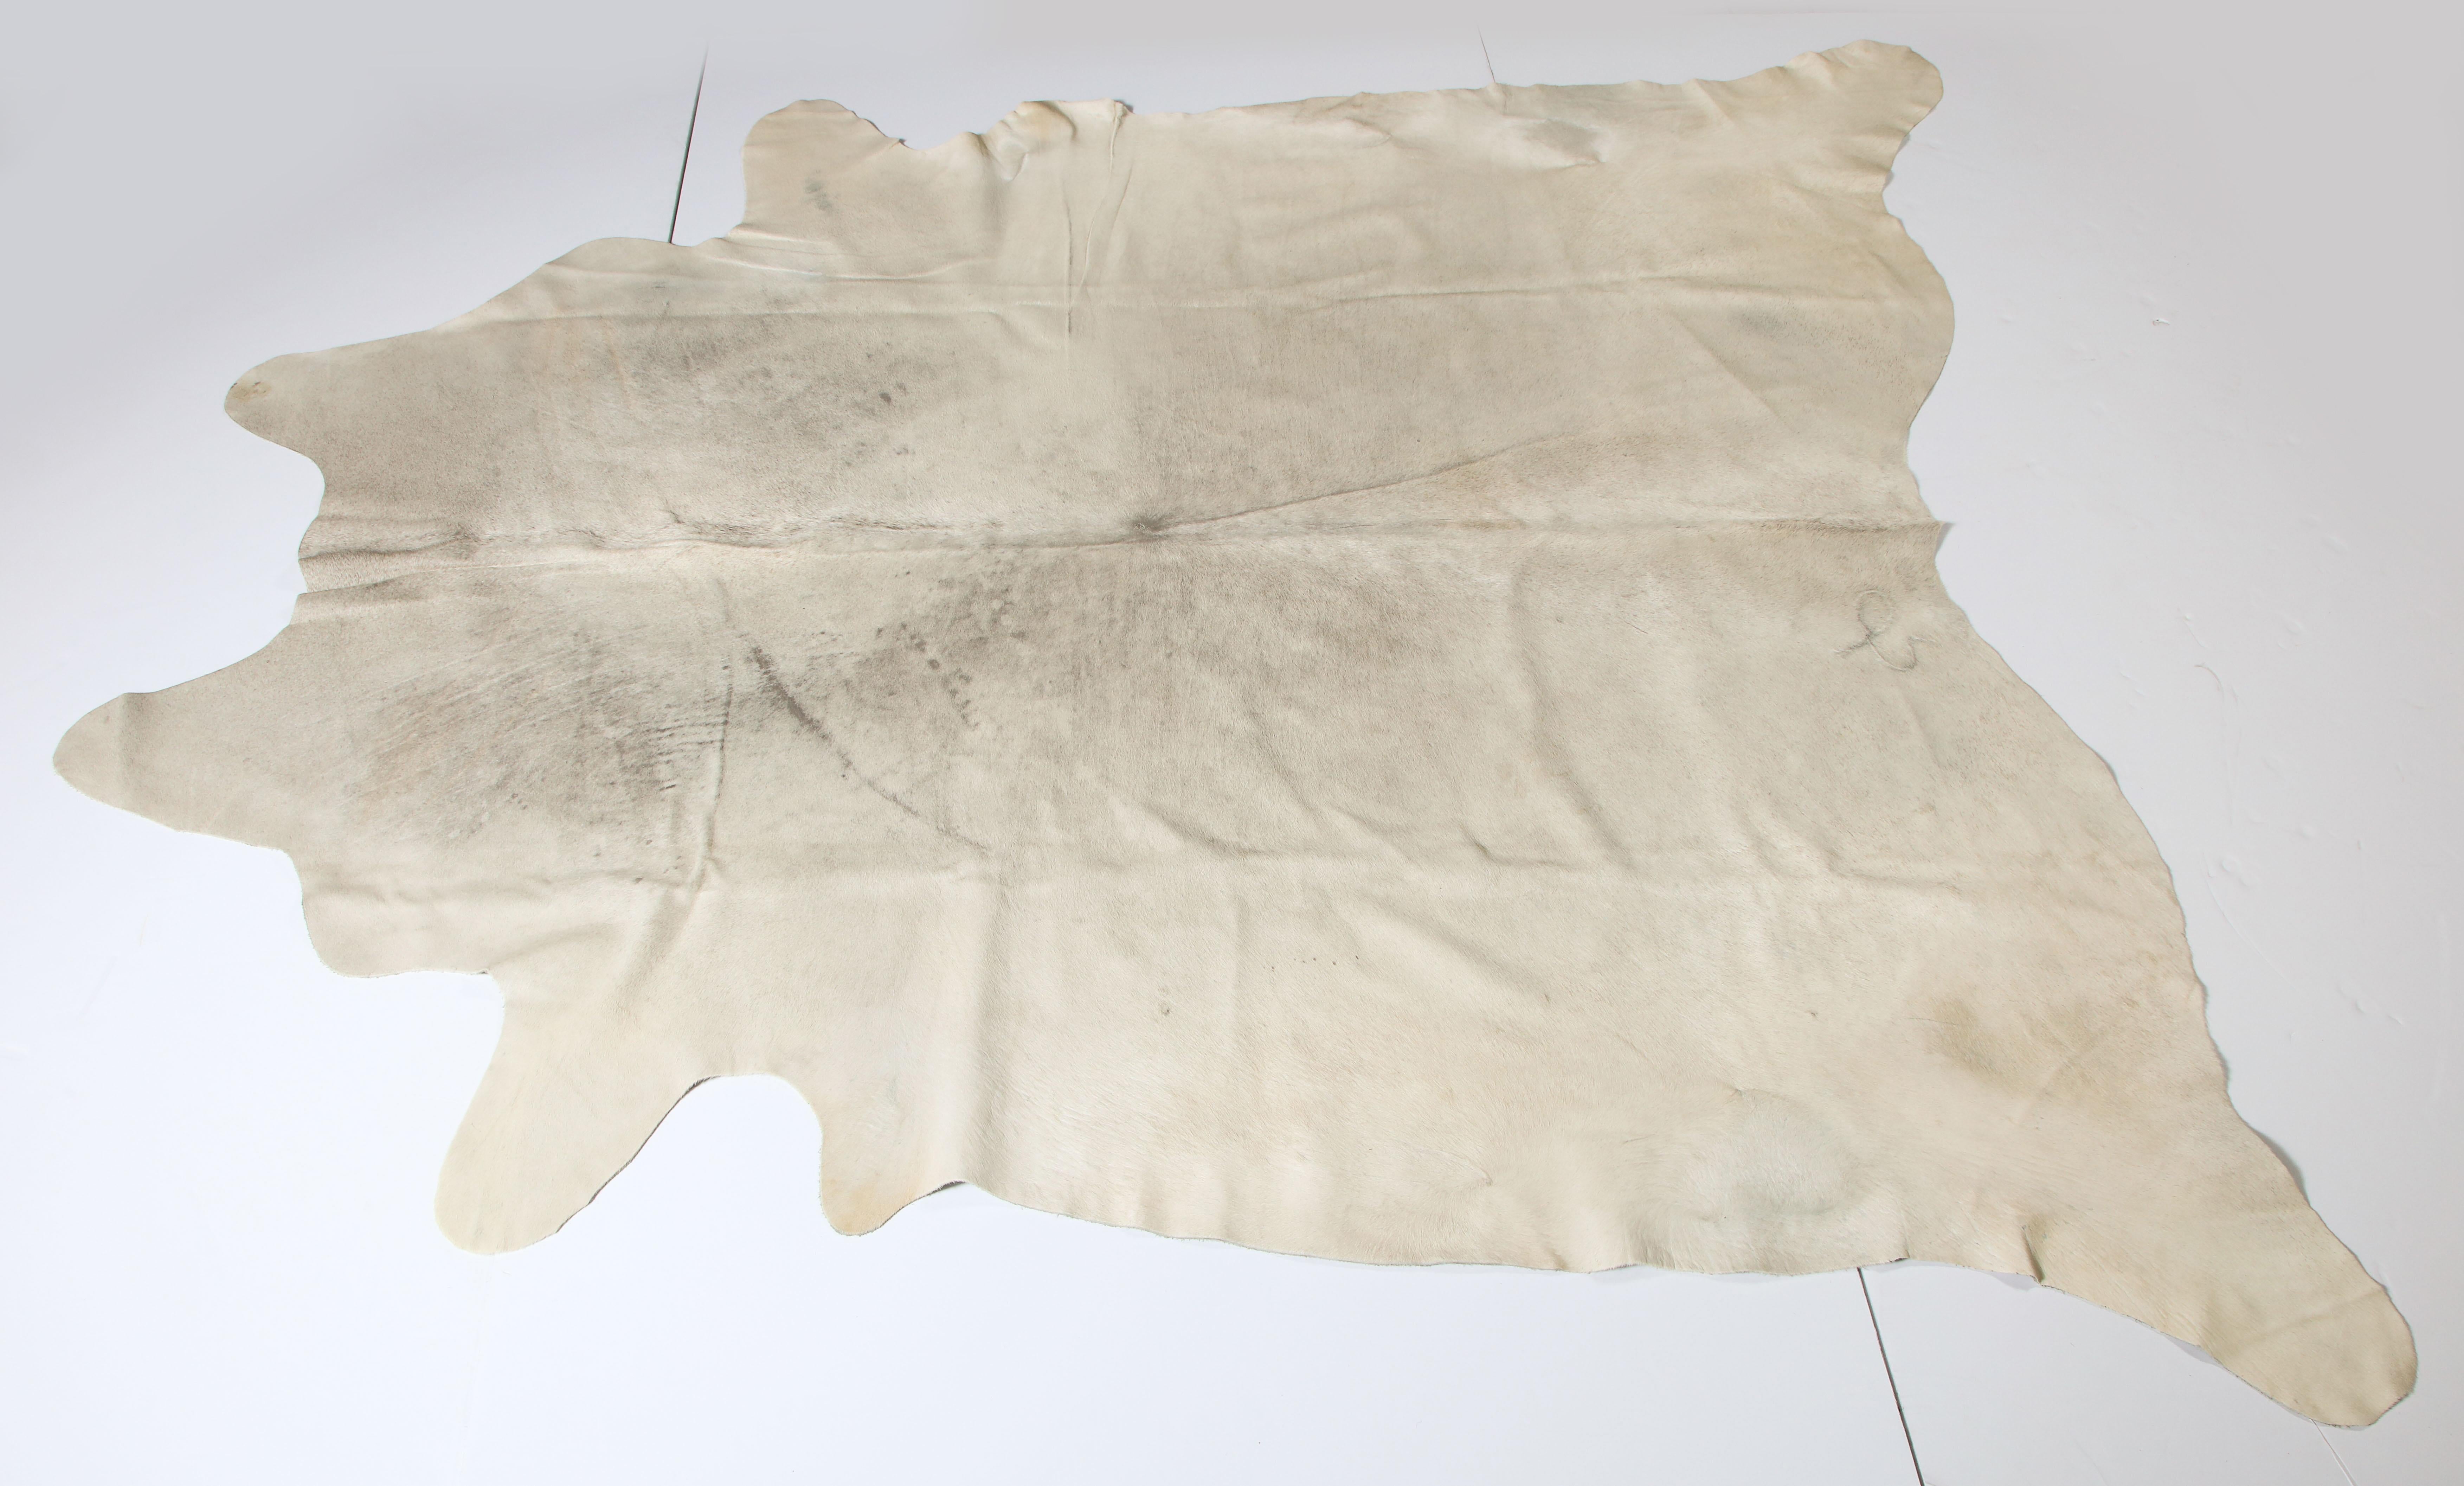 Cow hide, lightly vintage.
If you measure from leg to leg, one side is 111 inches and in the other direction it is 105 inches.
Cream color with a little bit of grey.
Good condition.